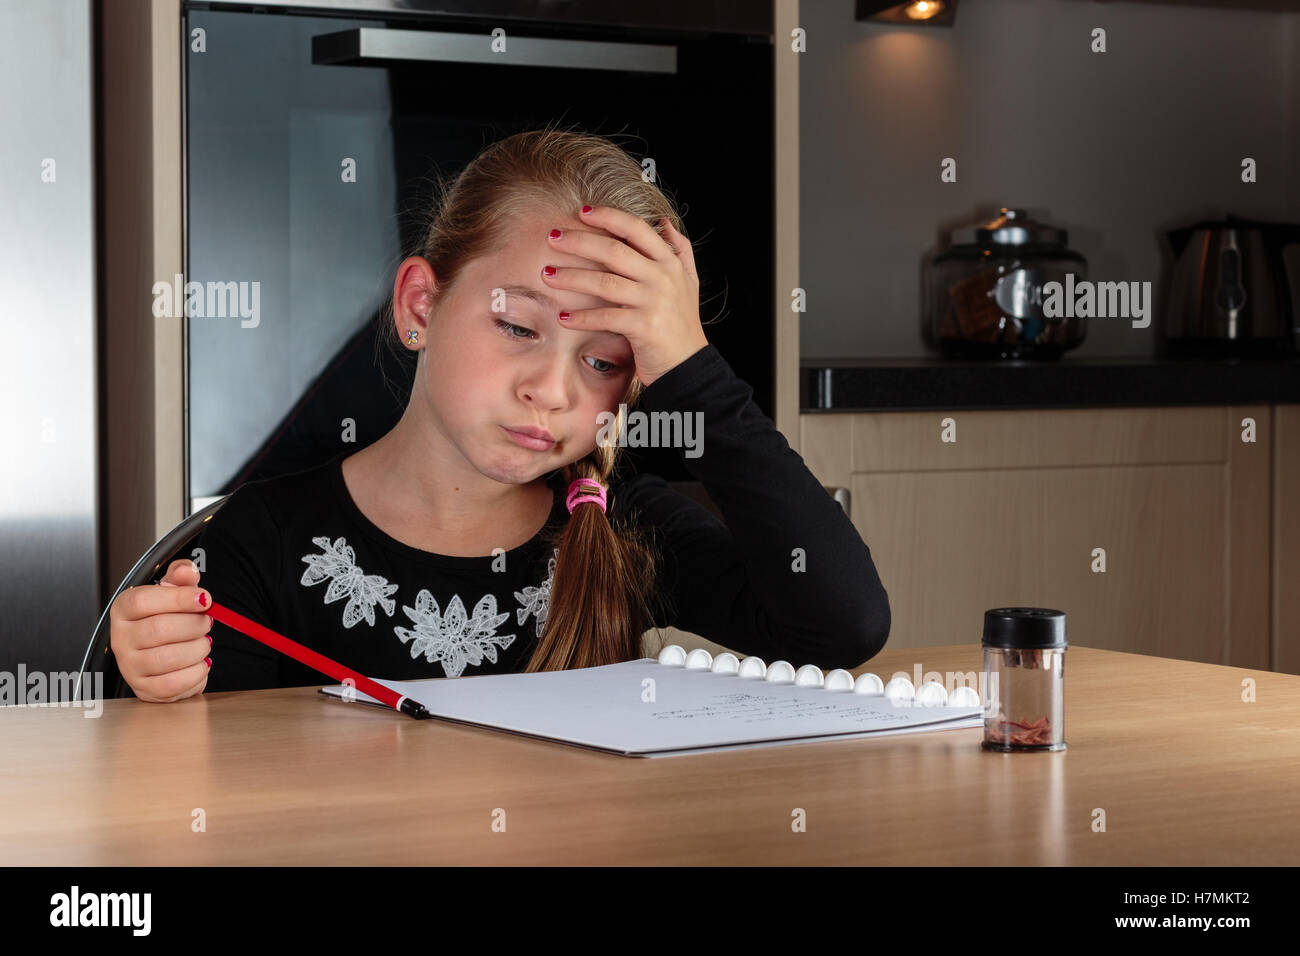 Young girl doing homework at home at the kitchen table sighing. Stock Photo